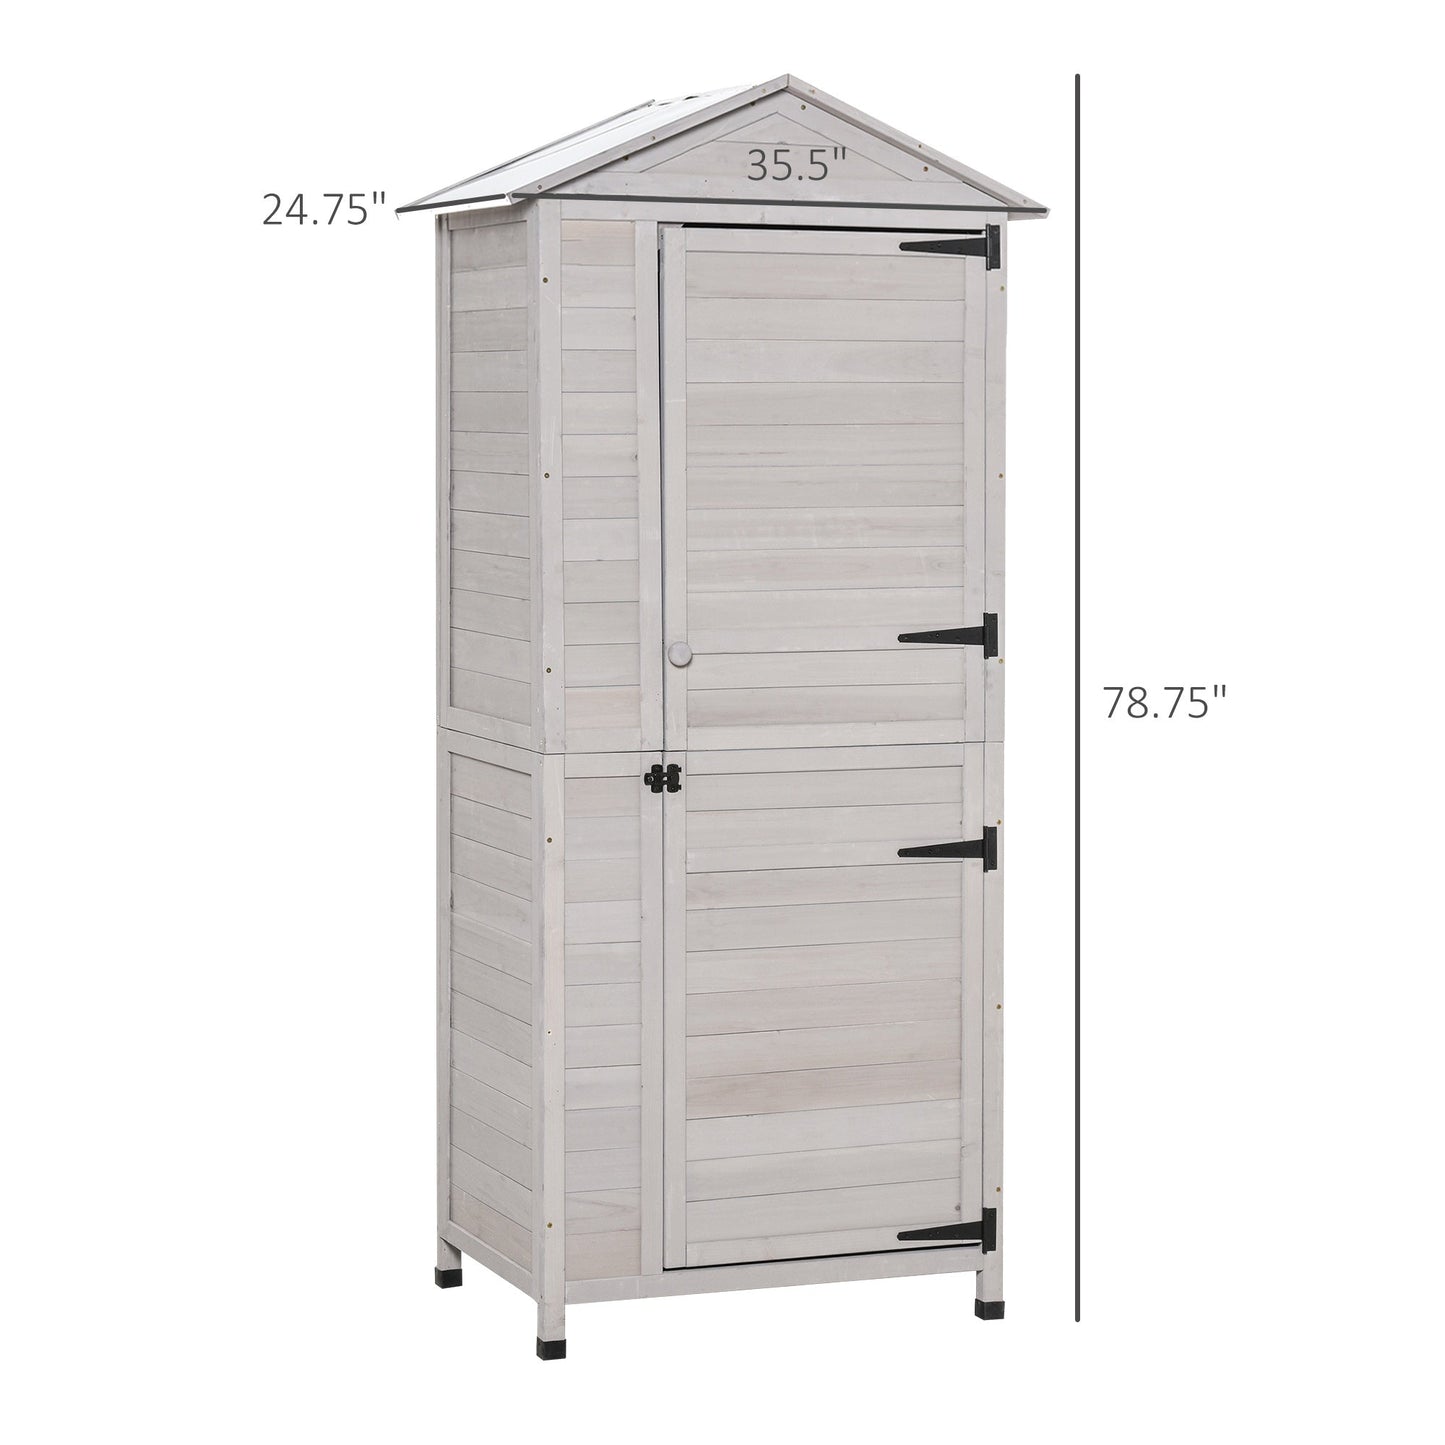 Outdoor and Garden-Wooden Garden Cabinet, Backyard 4-Tier Storage Shed, 3 Shelves Lockable Organizer w/ Handle, Tin Roof, Magnetic Latch & Foot Pad, Light Gray - Outdoor Style Company